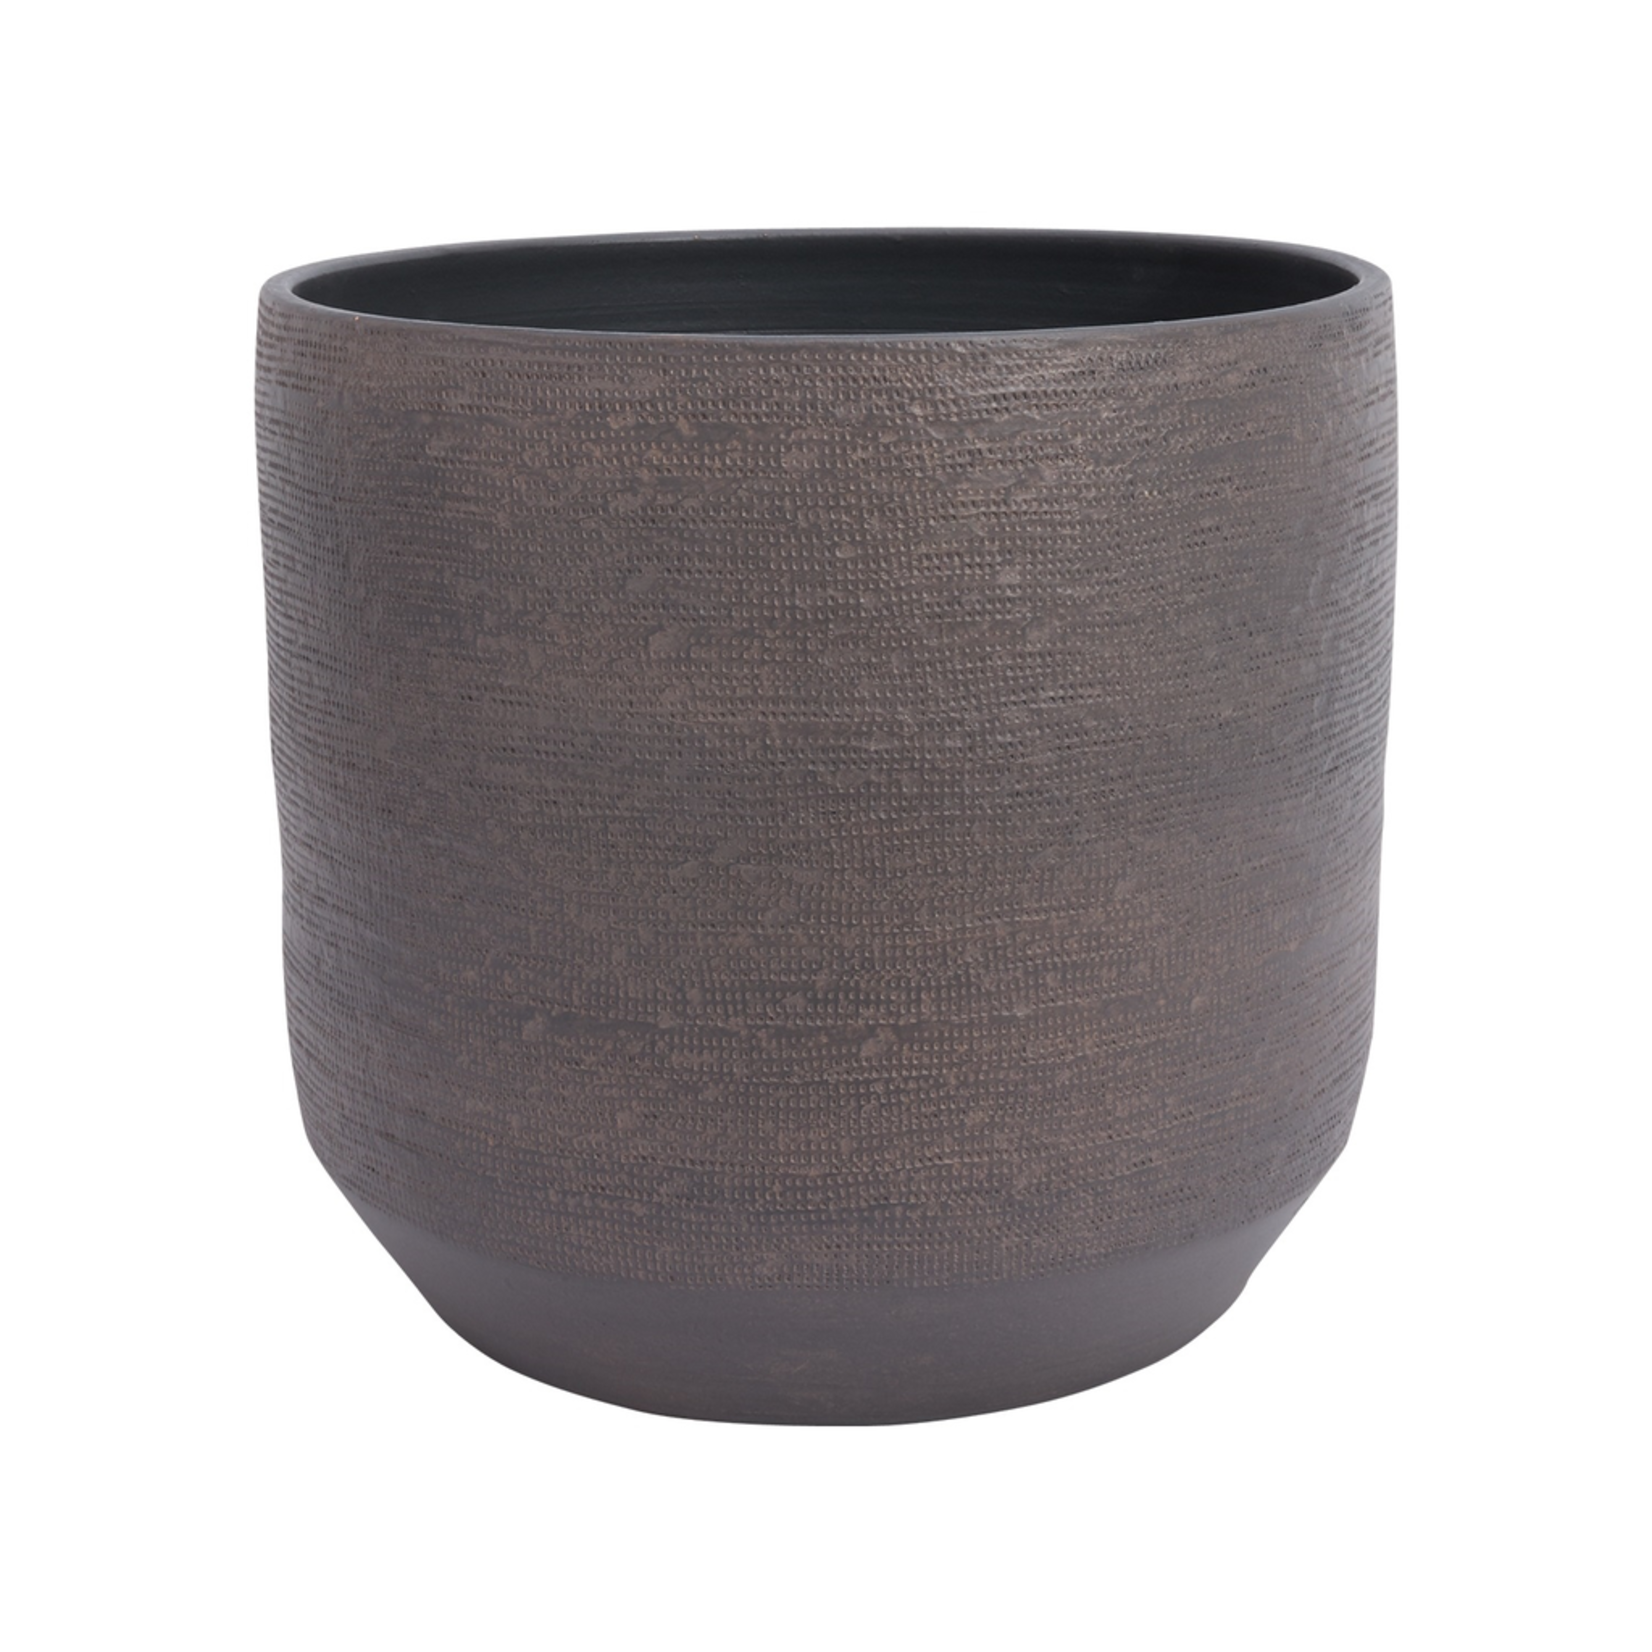 50% off was $52 now $36.00, 13"x 12”H GREY RAY POT  (AD) (AD)